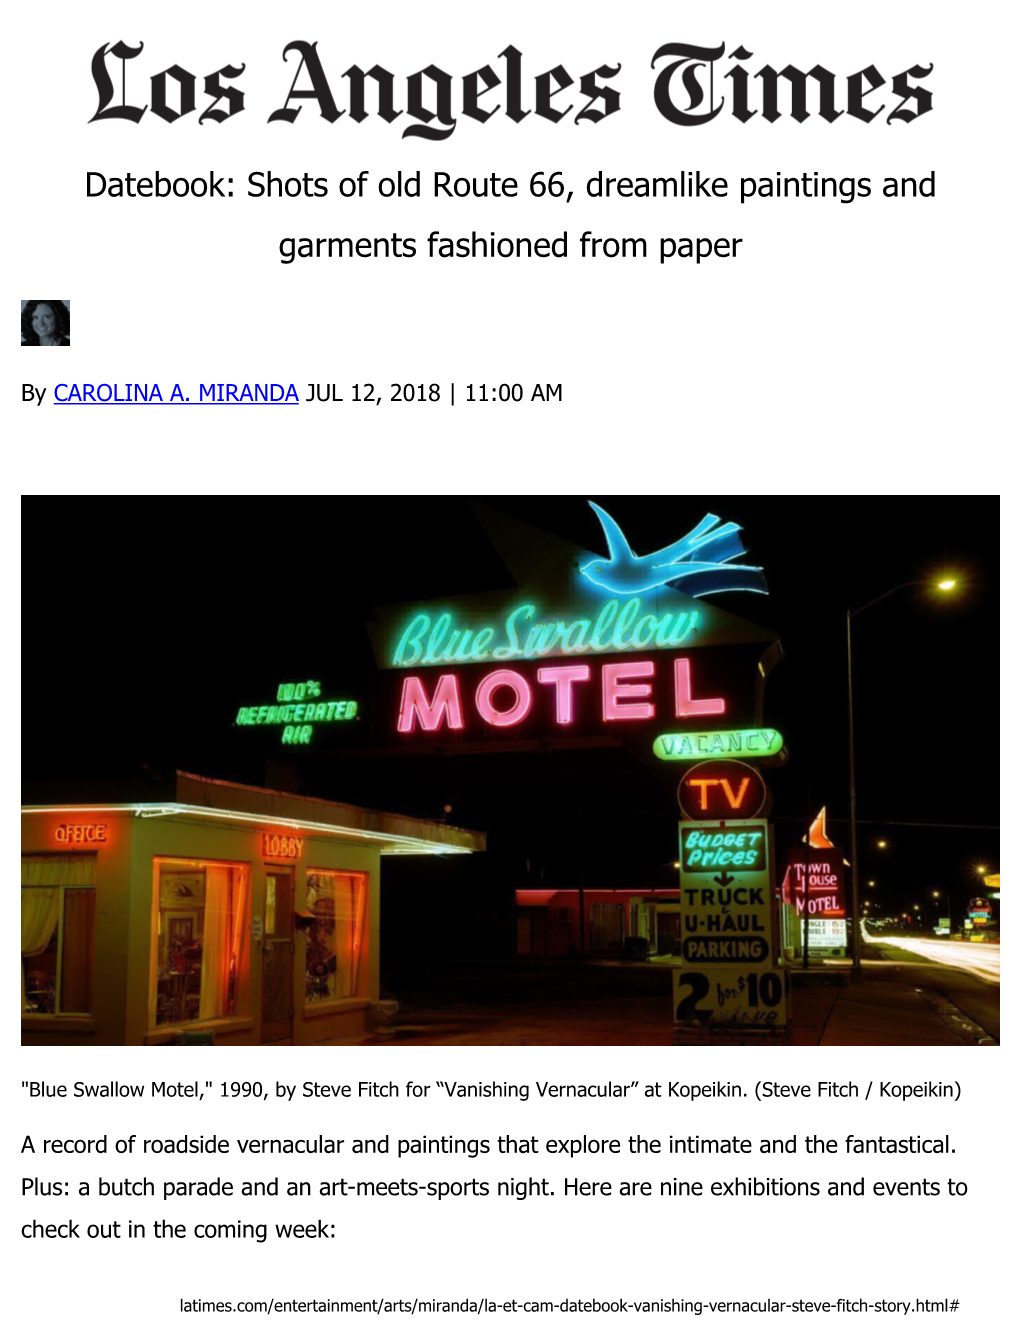 Datebook: Shots of Old Route 66, Dreamlike Paintings and Garments Fashioned from Paper